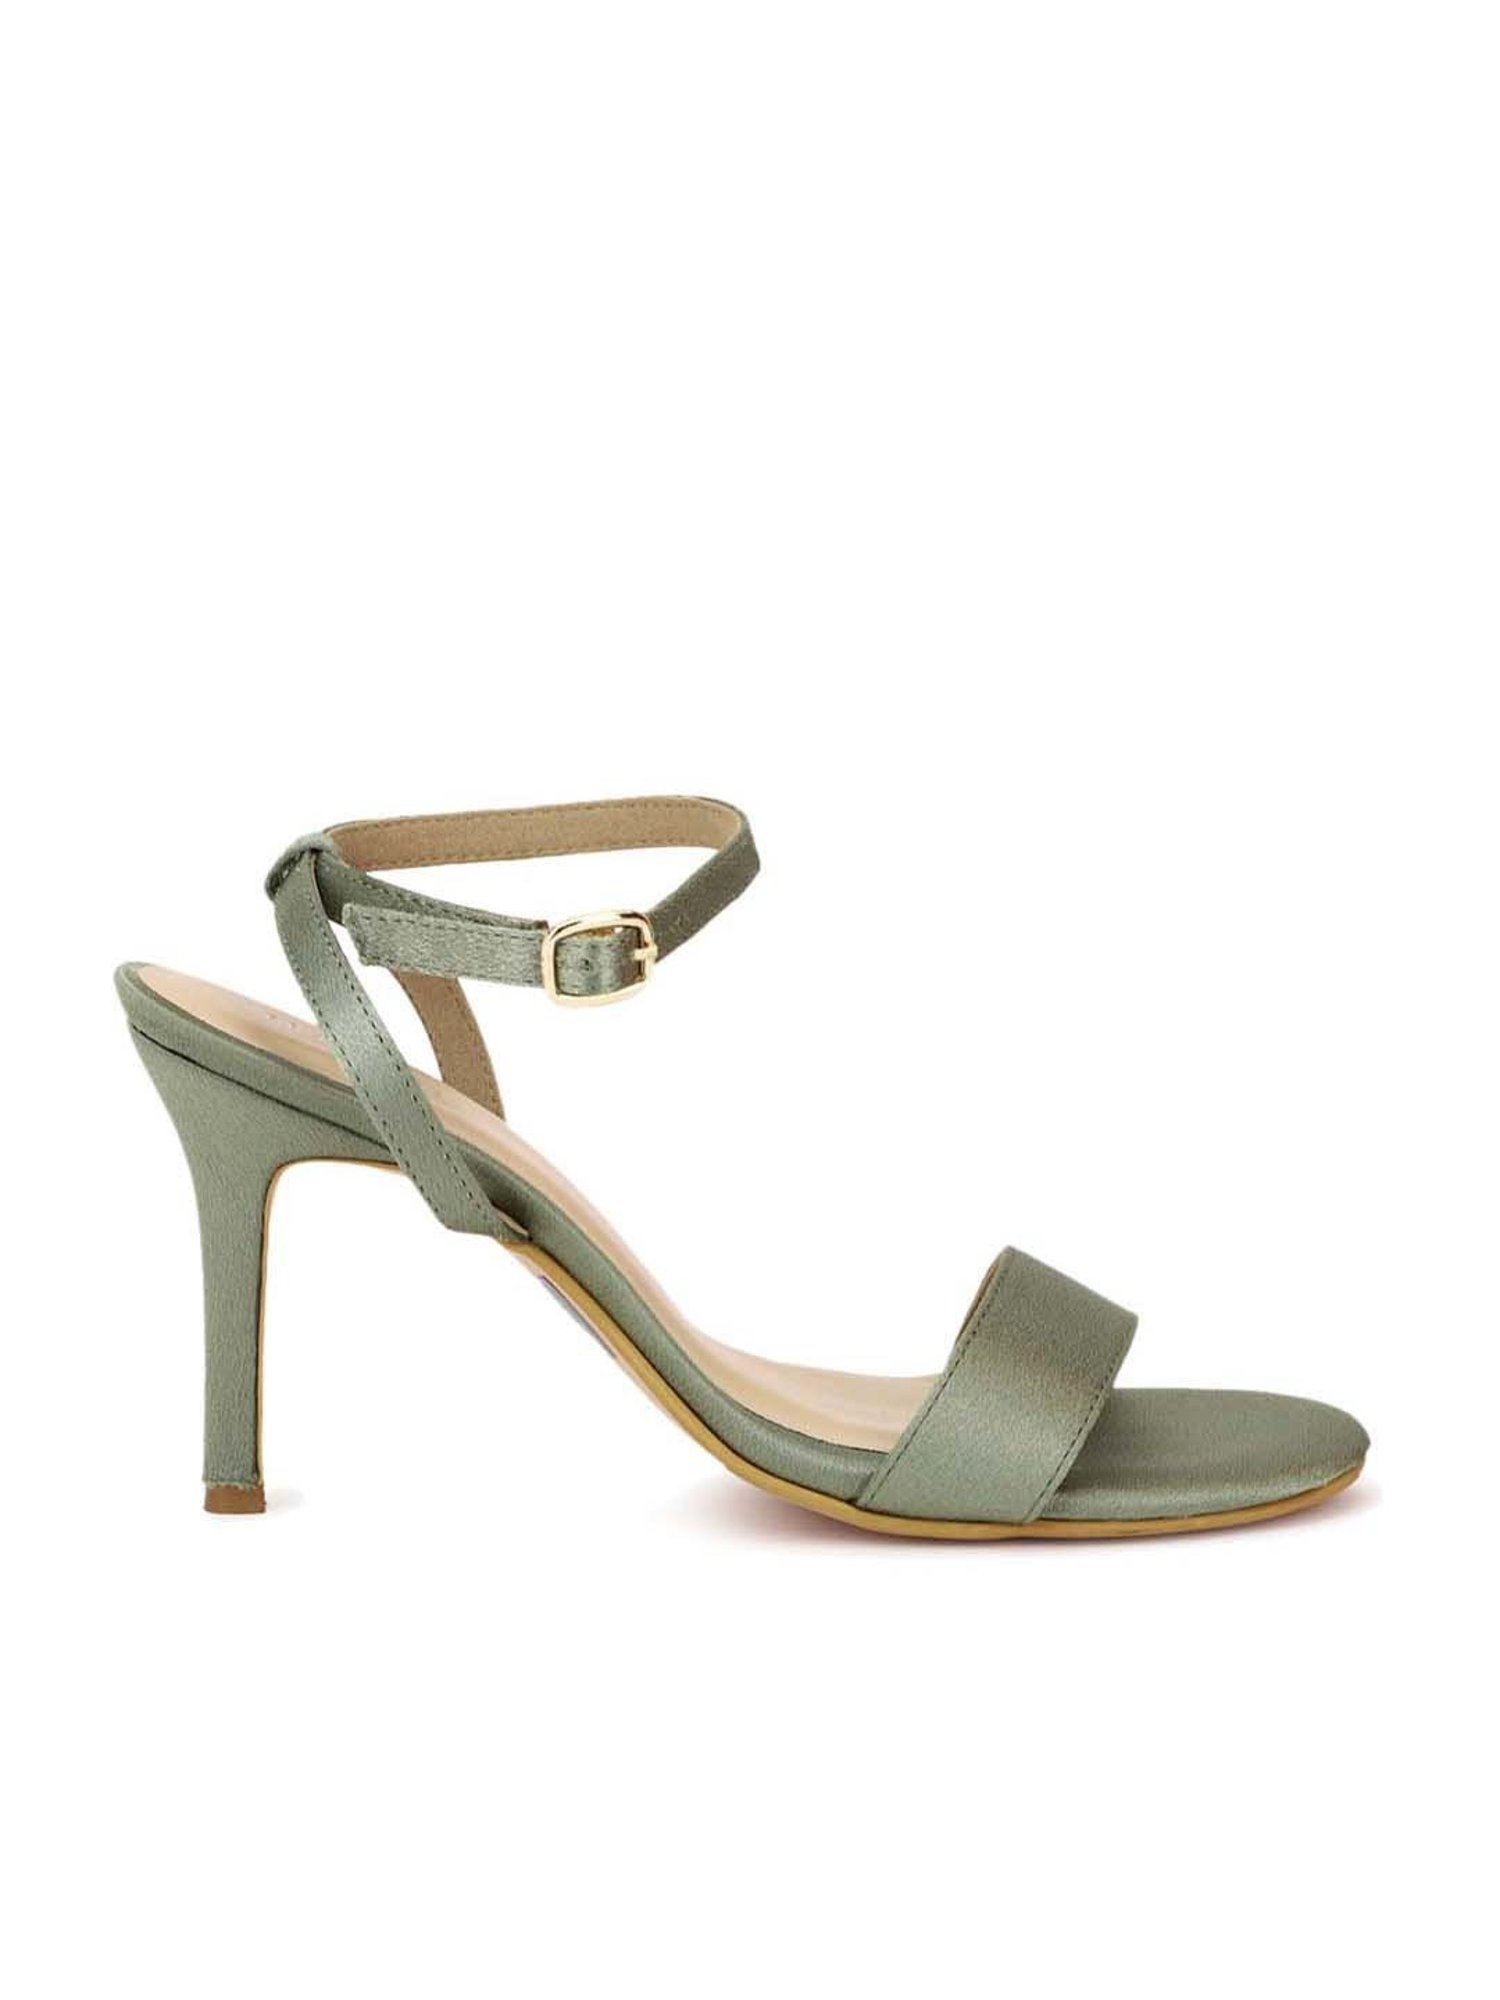 Strappy sandals - Olive green - Ladies | H&M IN